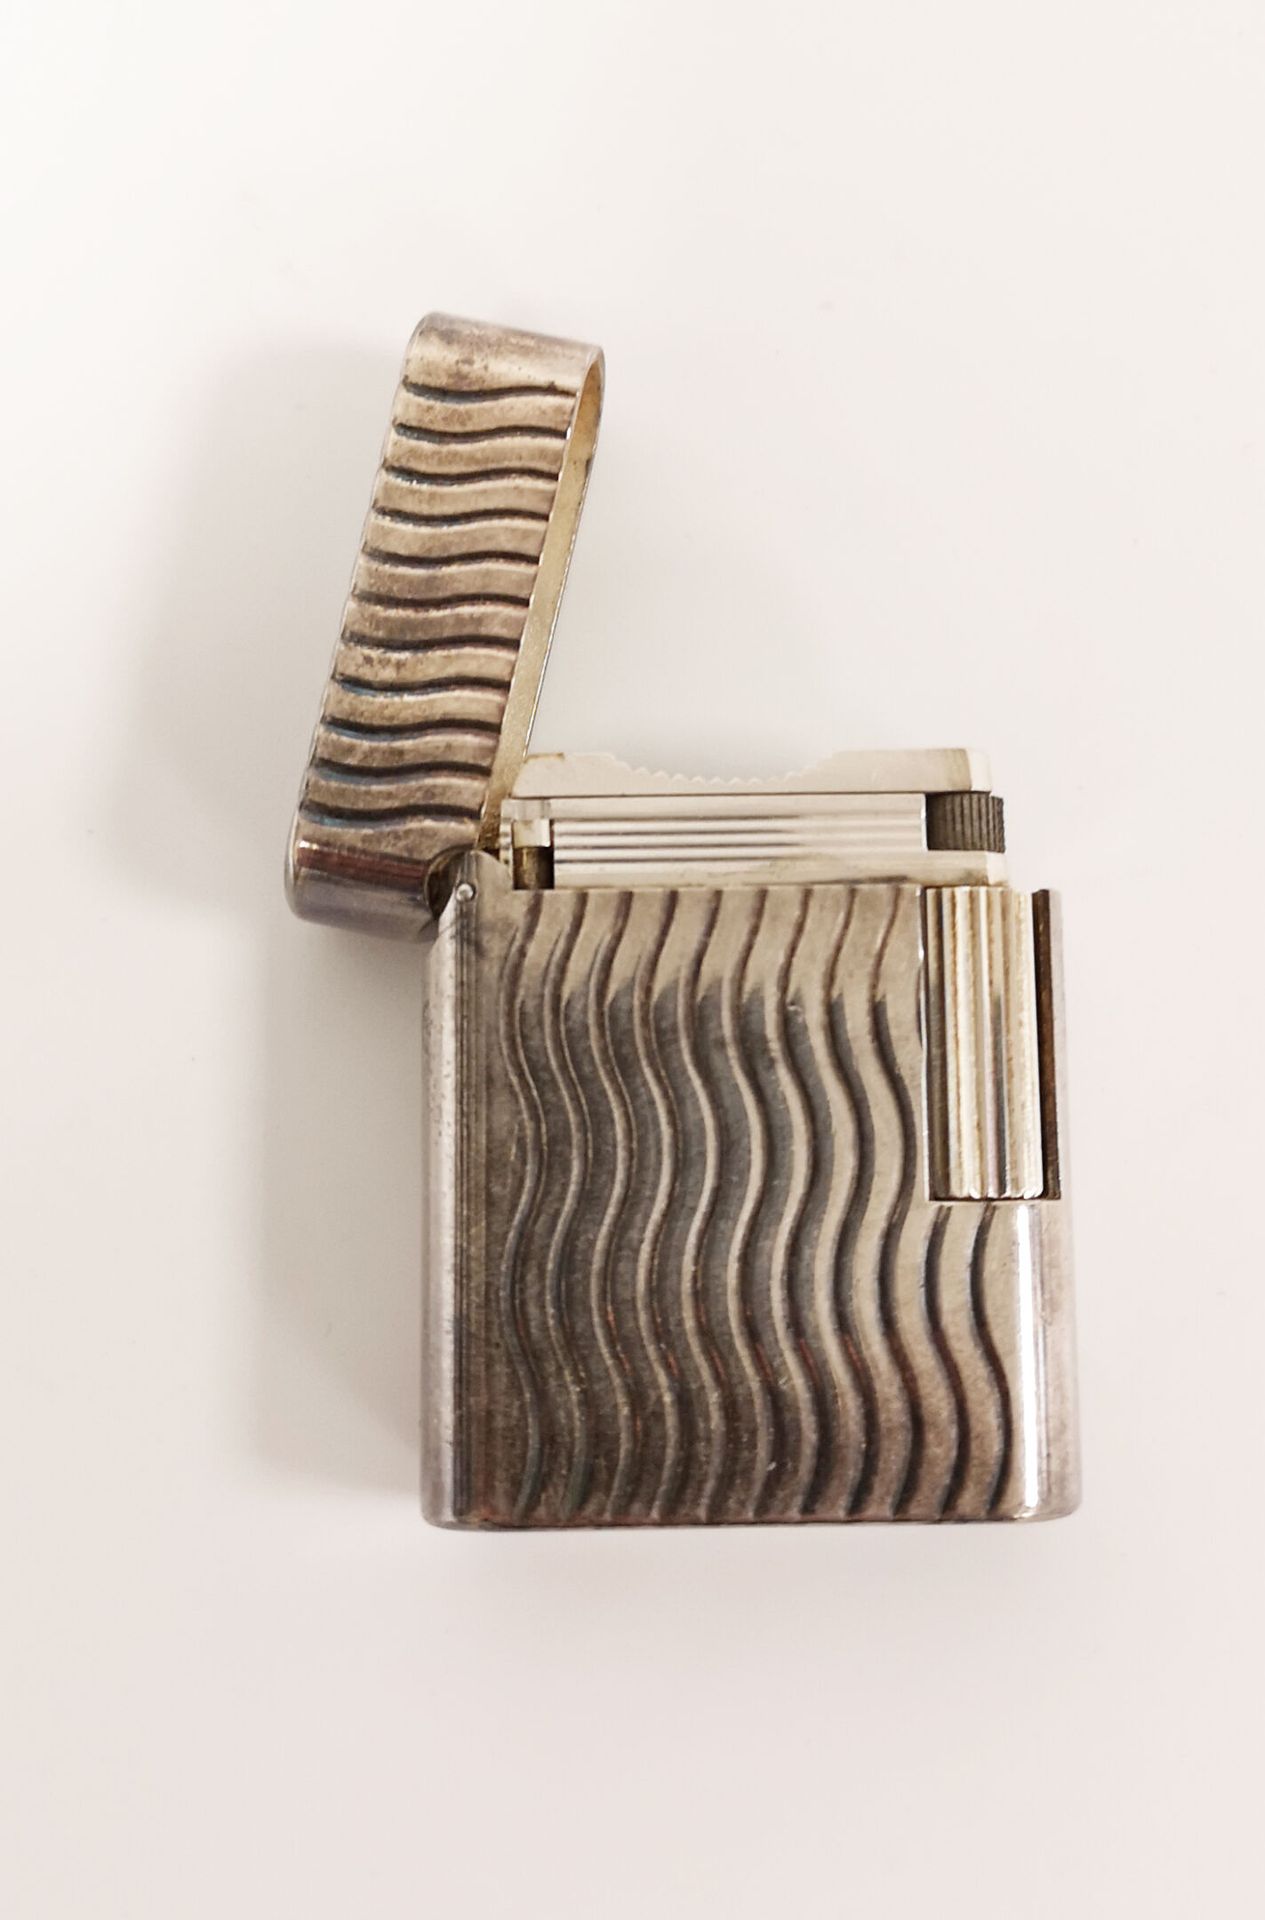 S.T. DUPONT Silver-plated metal lighter with undulating vertical incised lines.
&hellip;